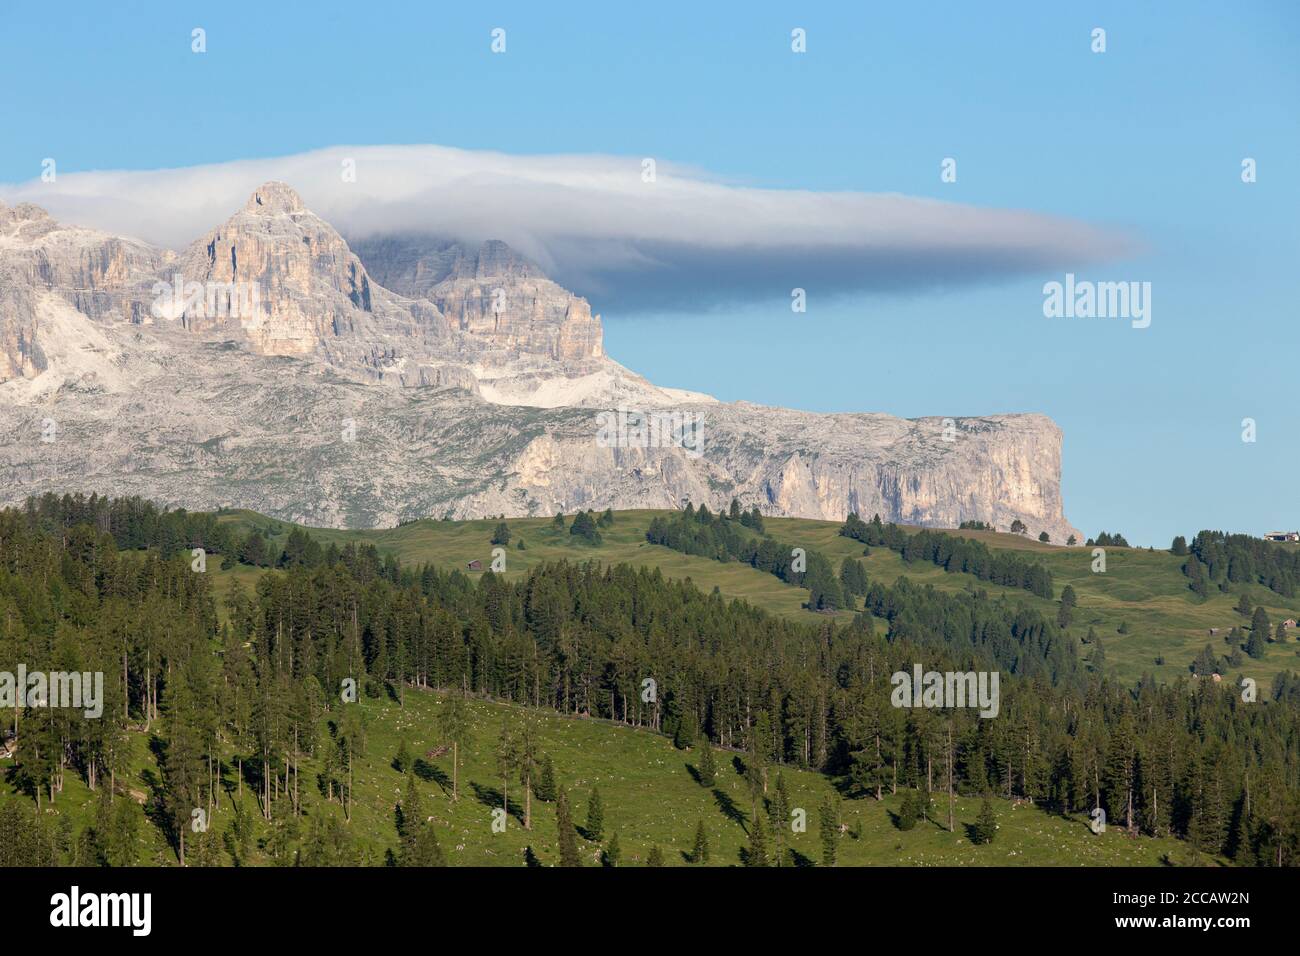 View of part of the Sella group, a plateau-shaped massif in the Dolomites mountains of northern Italy Stock Photo